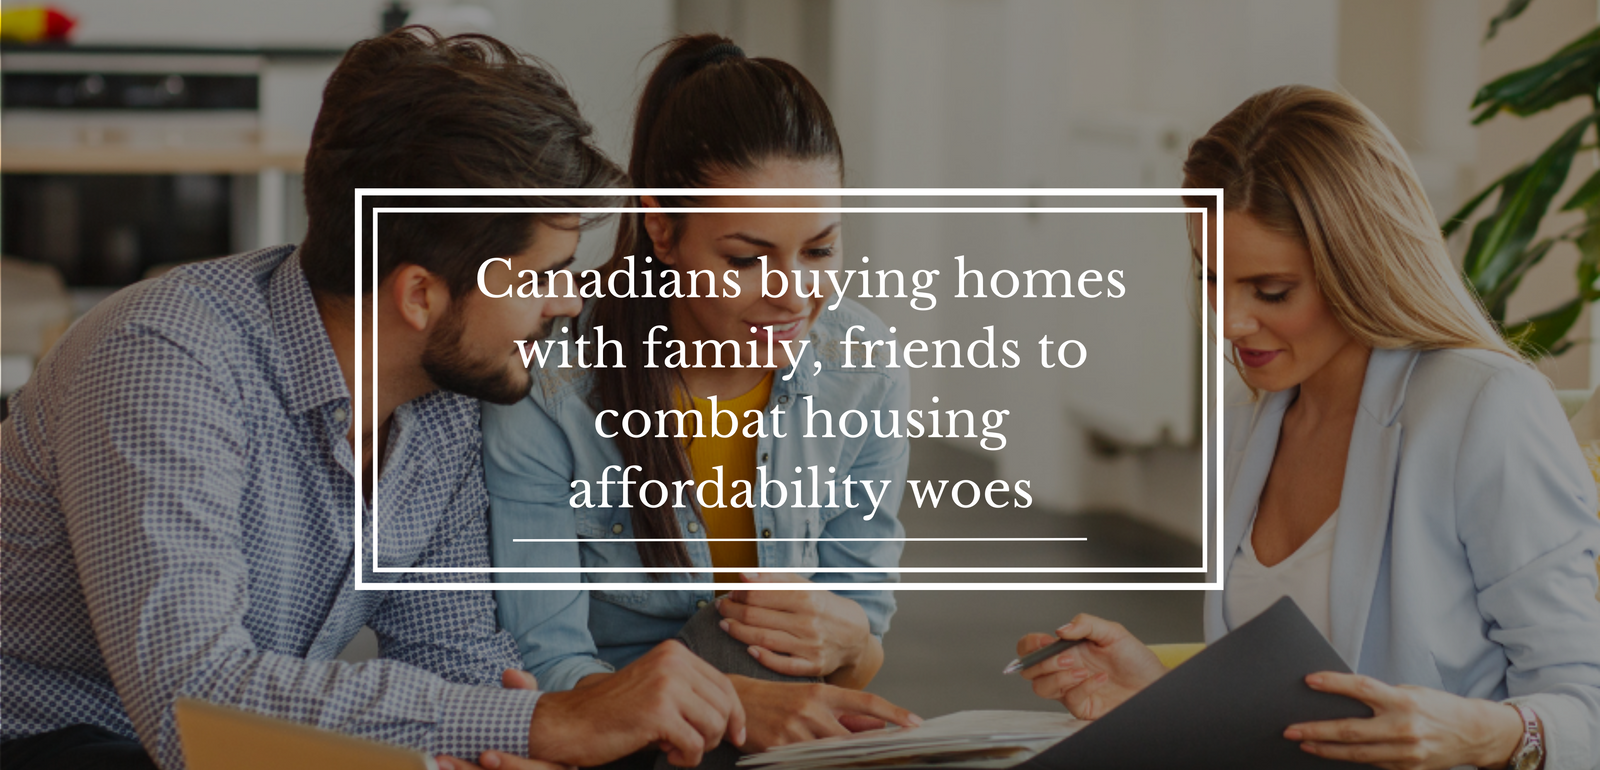 Canadians buying homes with family, friends to combat housing affordability woes: Royal LePage survey